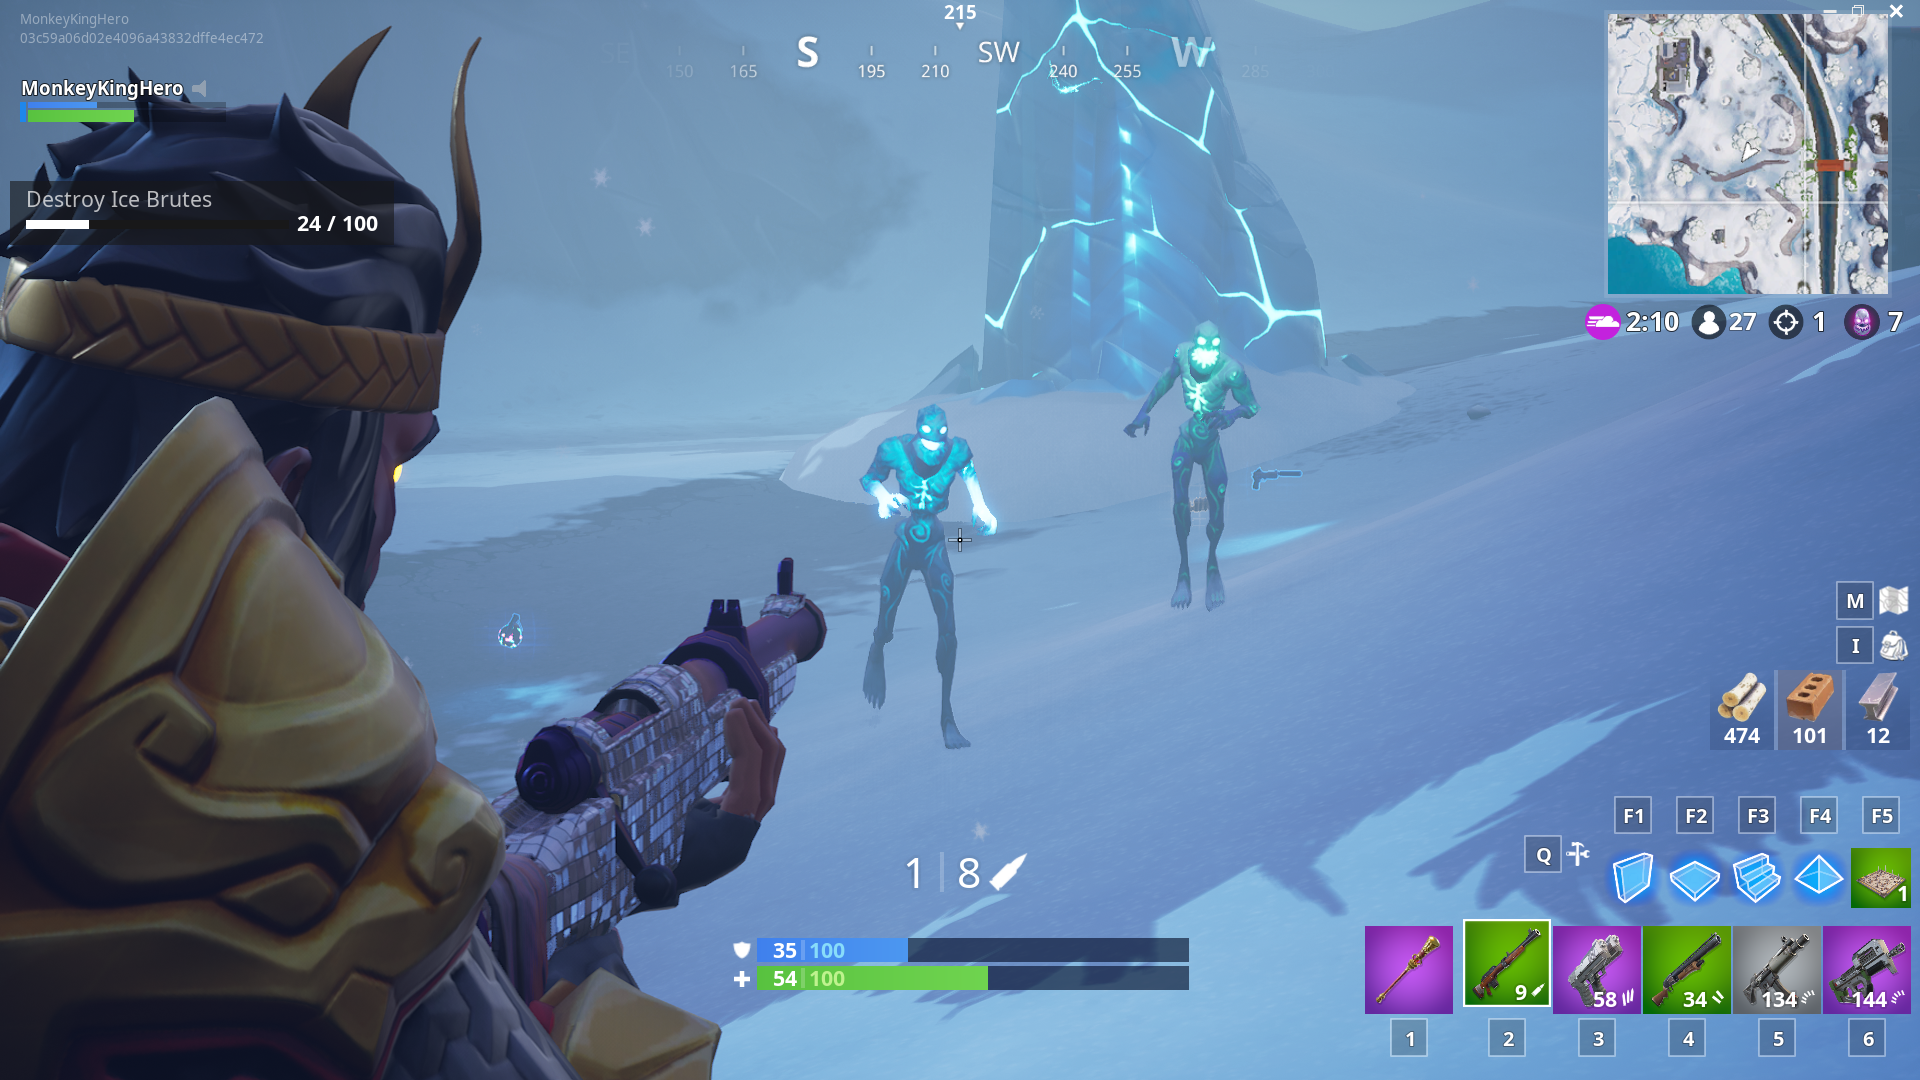 Where Do You Destroy Ice Fiends In Fortnite How To Complete The Destroy Ranged Ice Fiends Ice Storm Fortnite Challenge Dot Esports